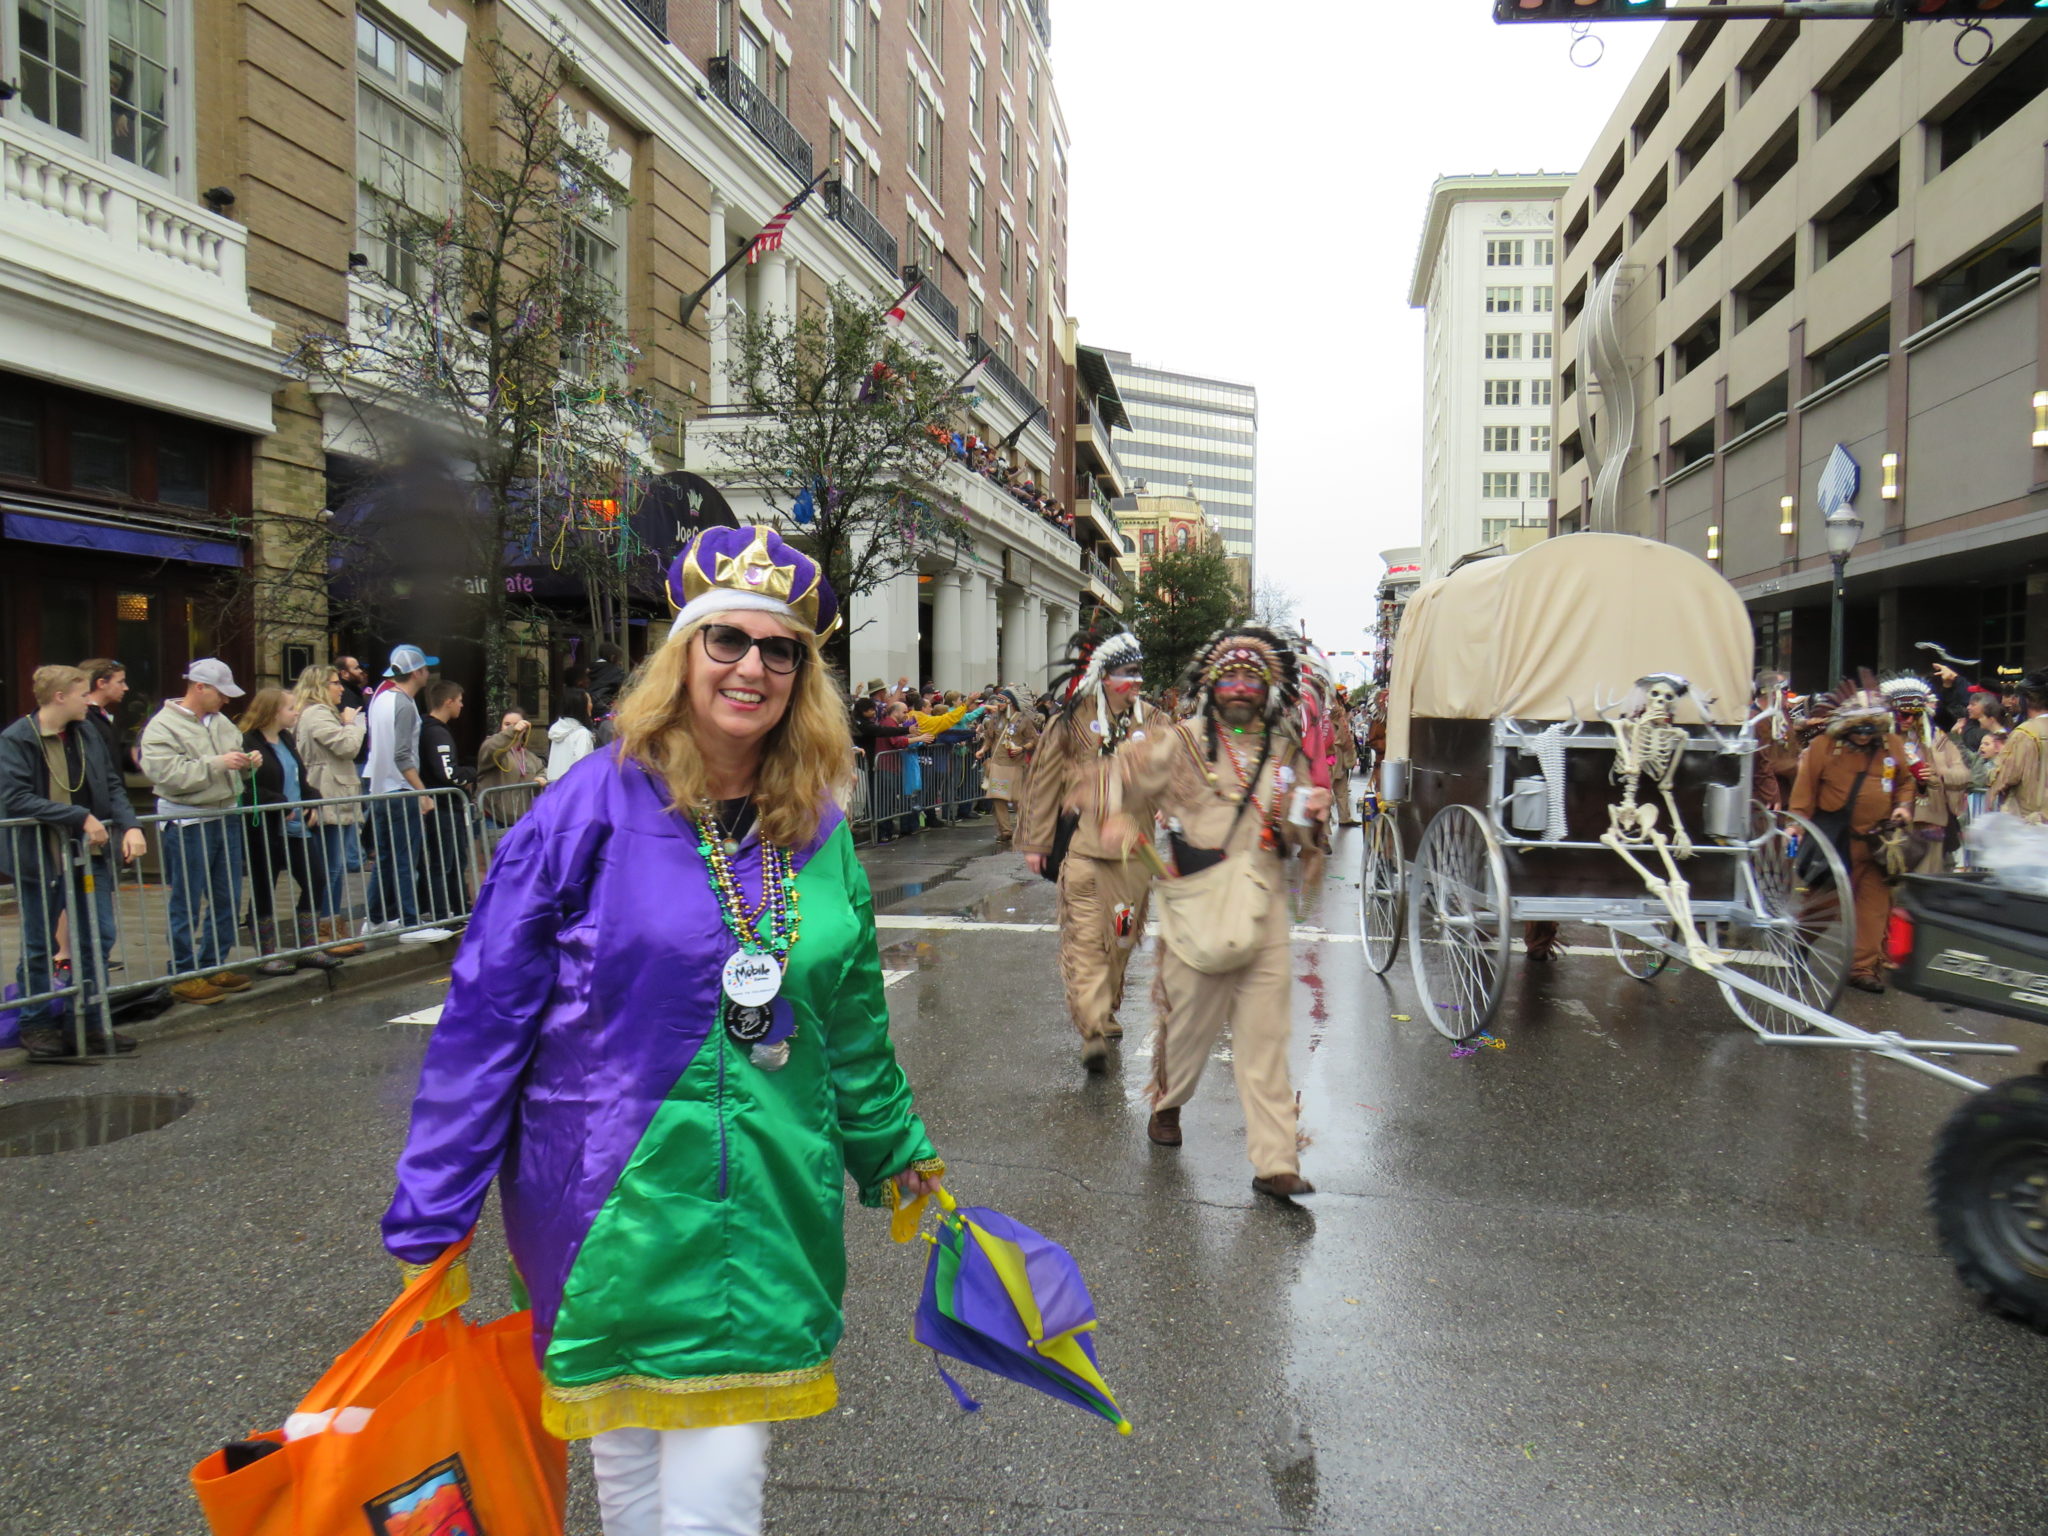 Mardi Gras in Mobile Alabama Holiday and Travel Expert Advice with